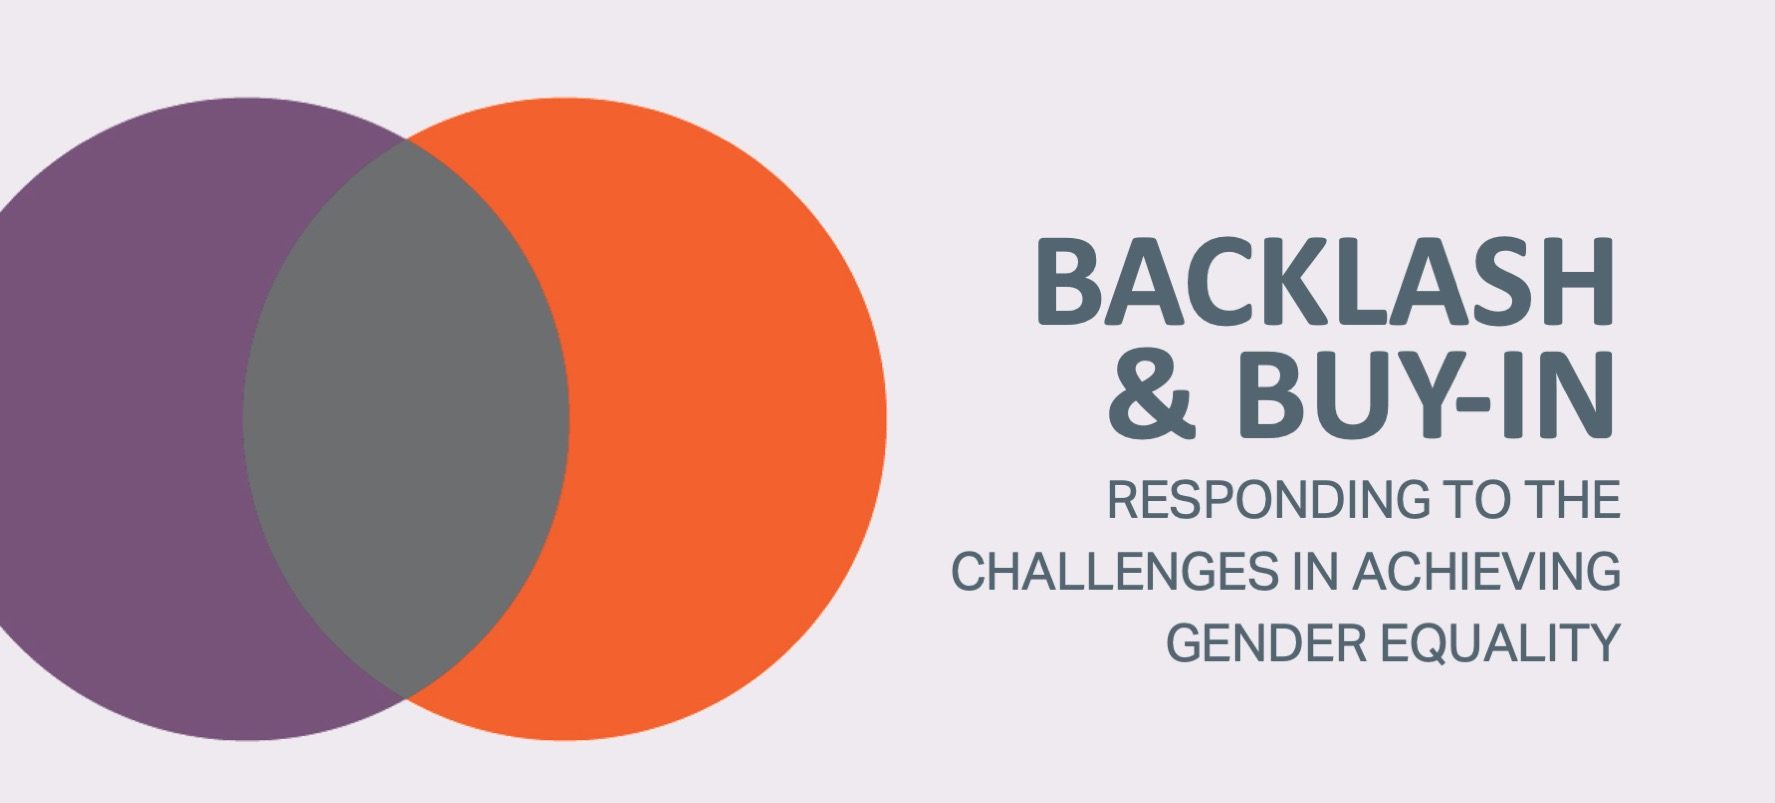 Responding to the Challenges in Achieving Gender Equality